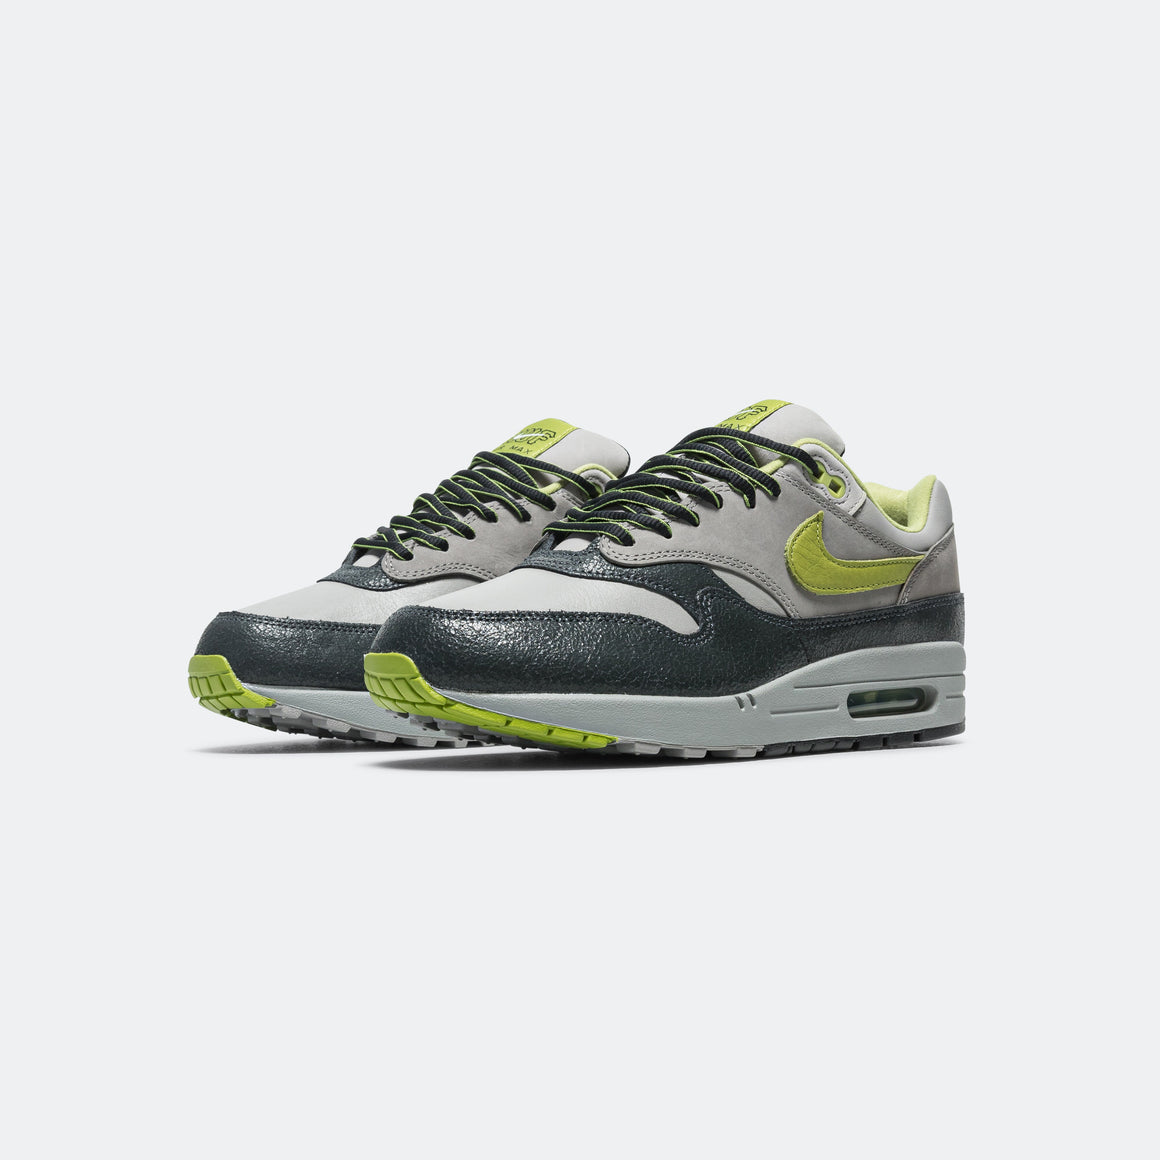 Nike - Air Max 1 STR x HUF - Anthracite/Pear-Medium Grey-Flat Pewter - UP THERE